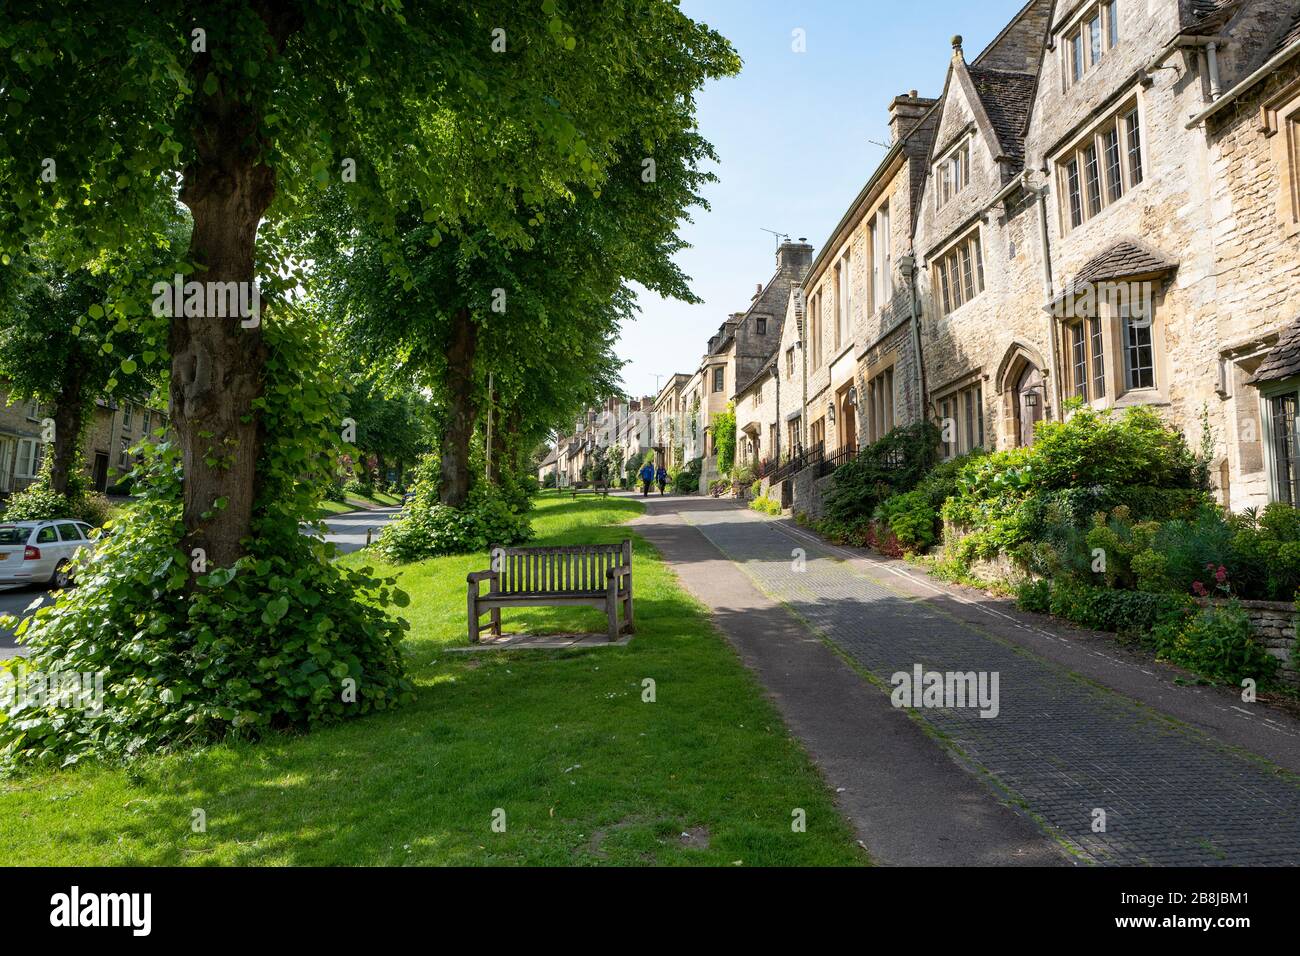 Le Bay Tree Hotel Burford Oxfordshire Banque D'Images